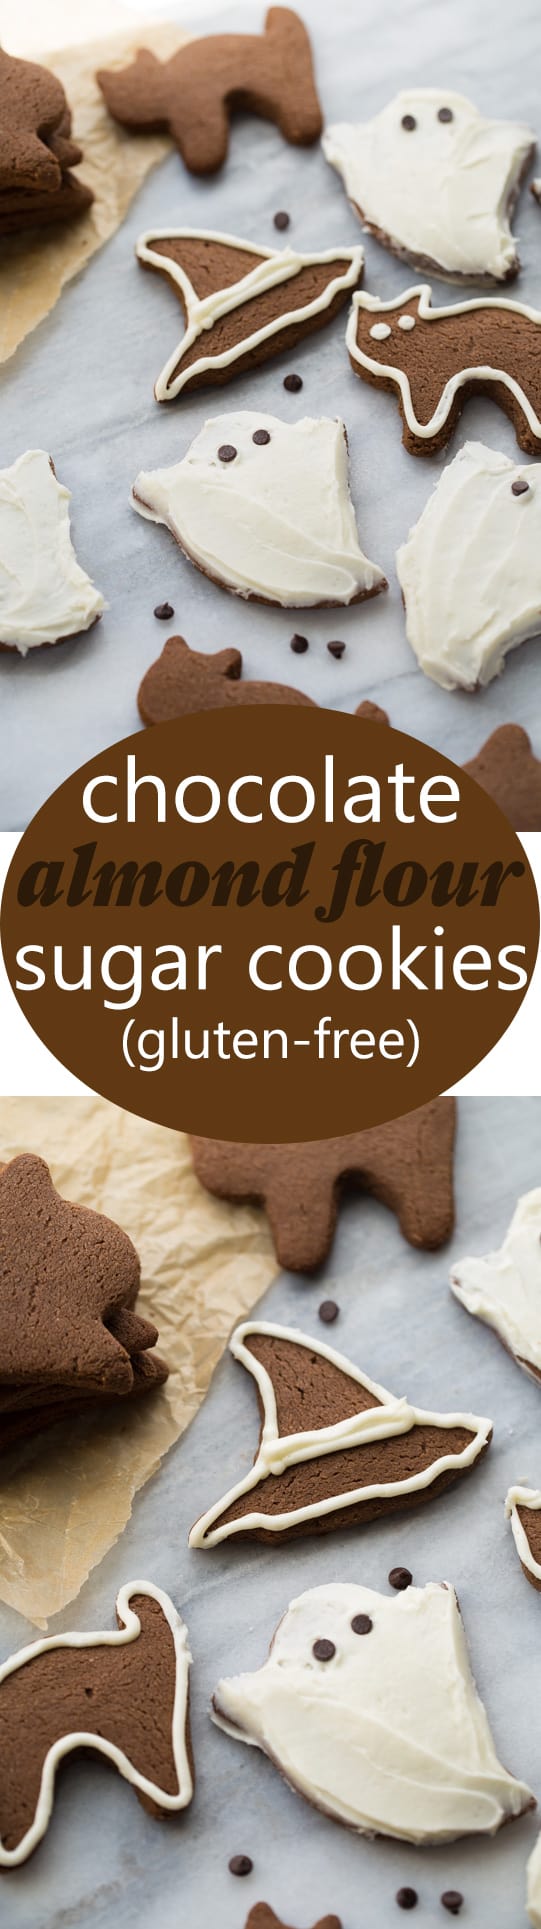 Chocolate Almond Flour Sugar Cookies! Soft in the middle, crisp on the edges. Easy to make and so fun to decorate!